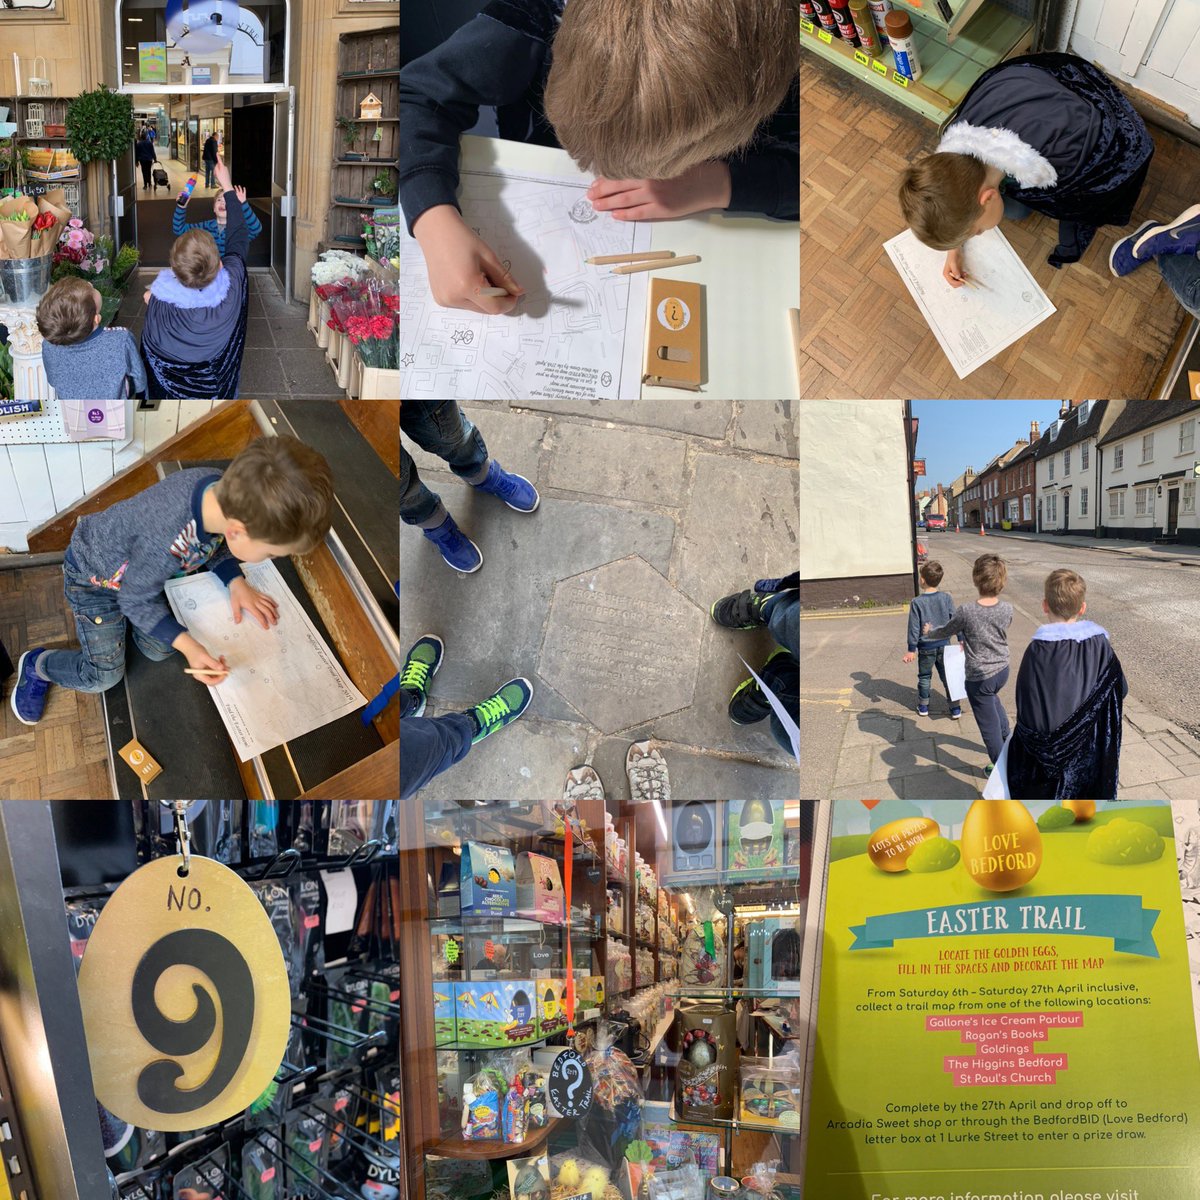 Some super duper #MiniMapMakers completing the @LoveBedford #Bedford Easter Trail- they’ve been to a #bookshop #Ironmonger #baker #tearoom #museum #church #arcadeshops #icecreamparlour #sweetshop